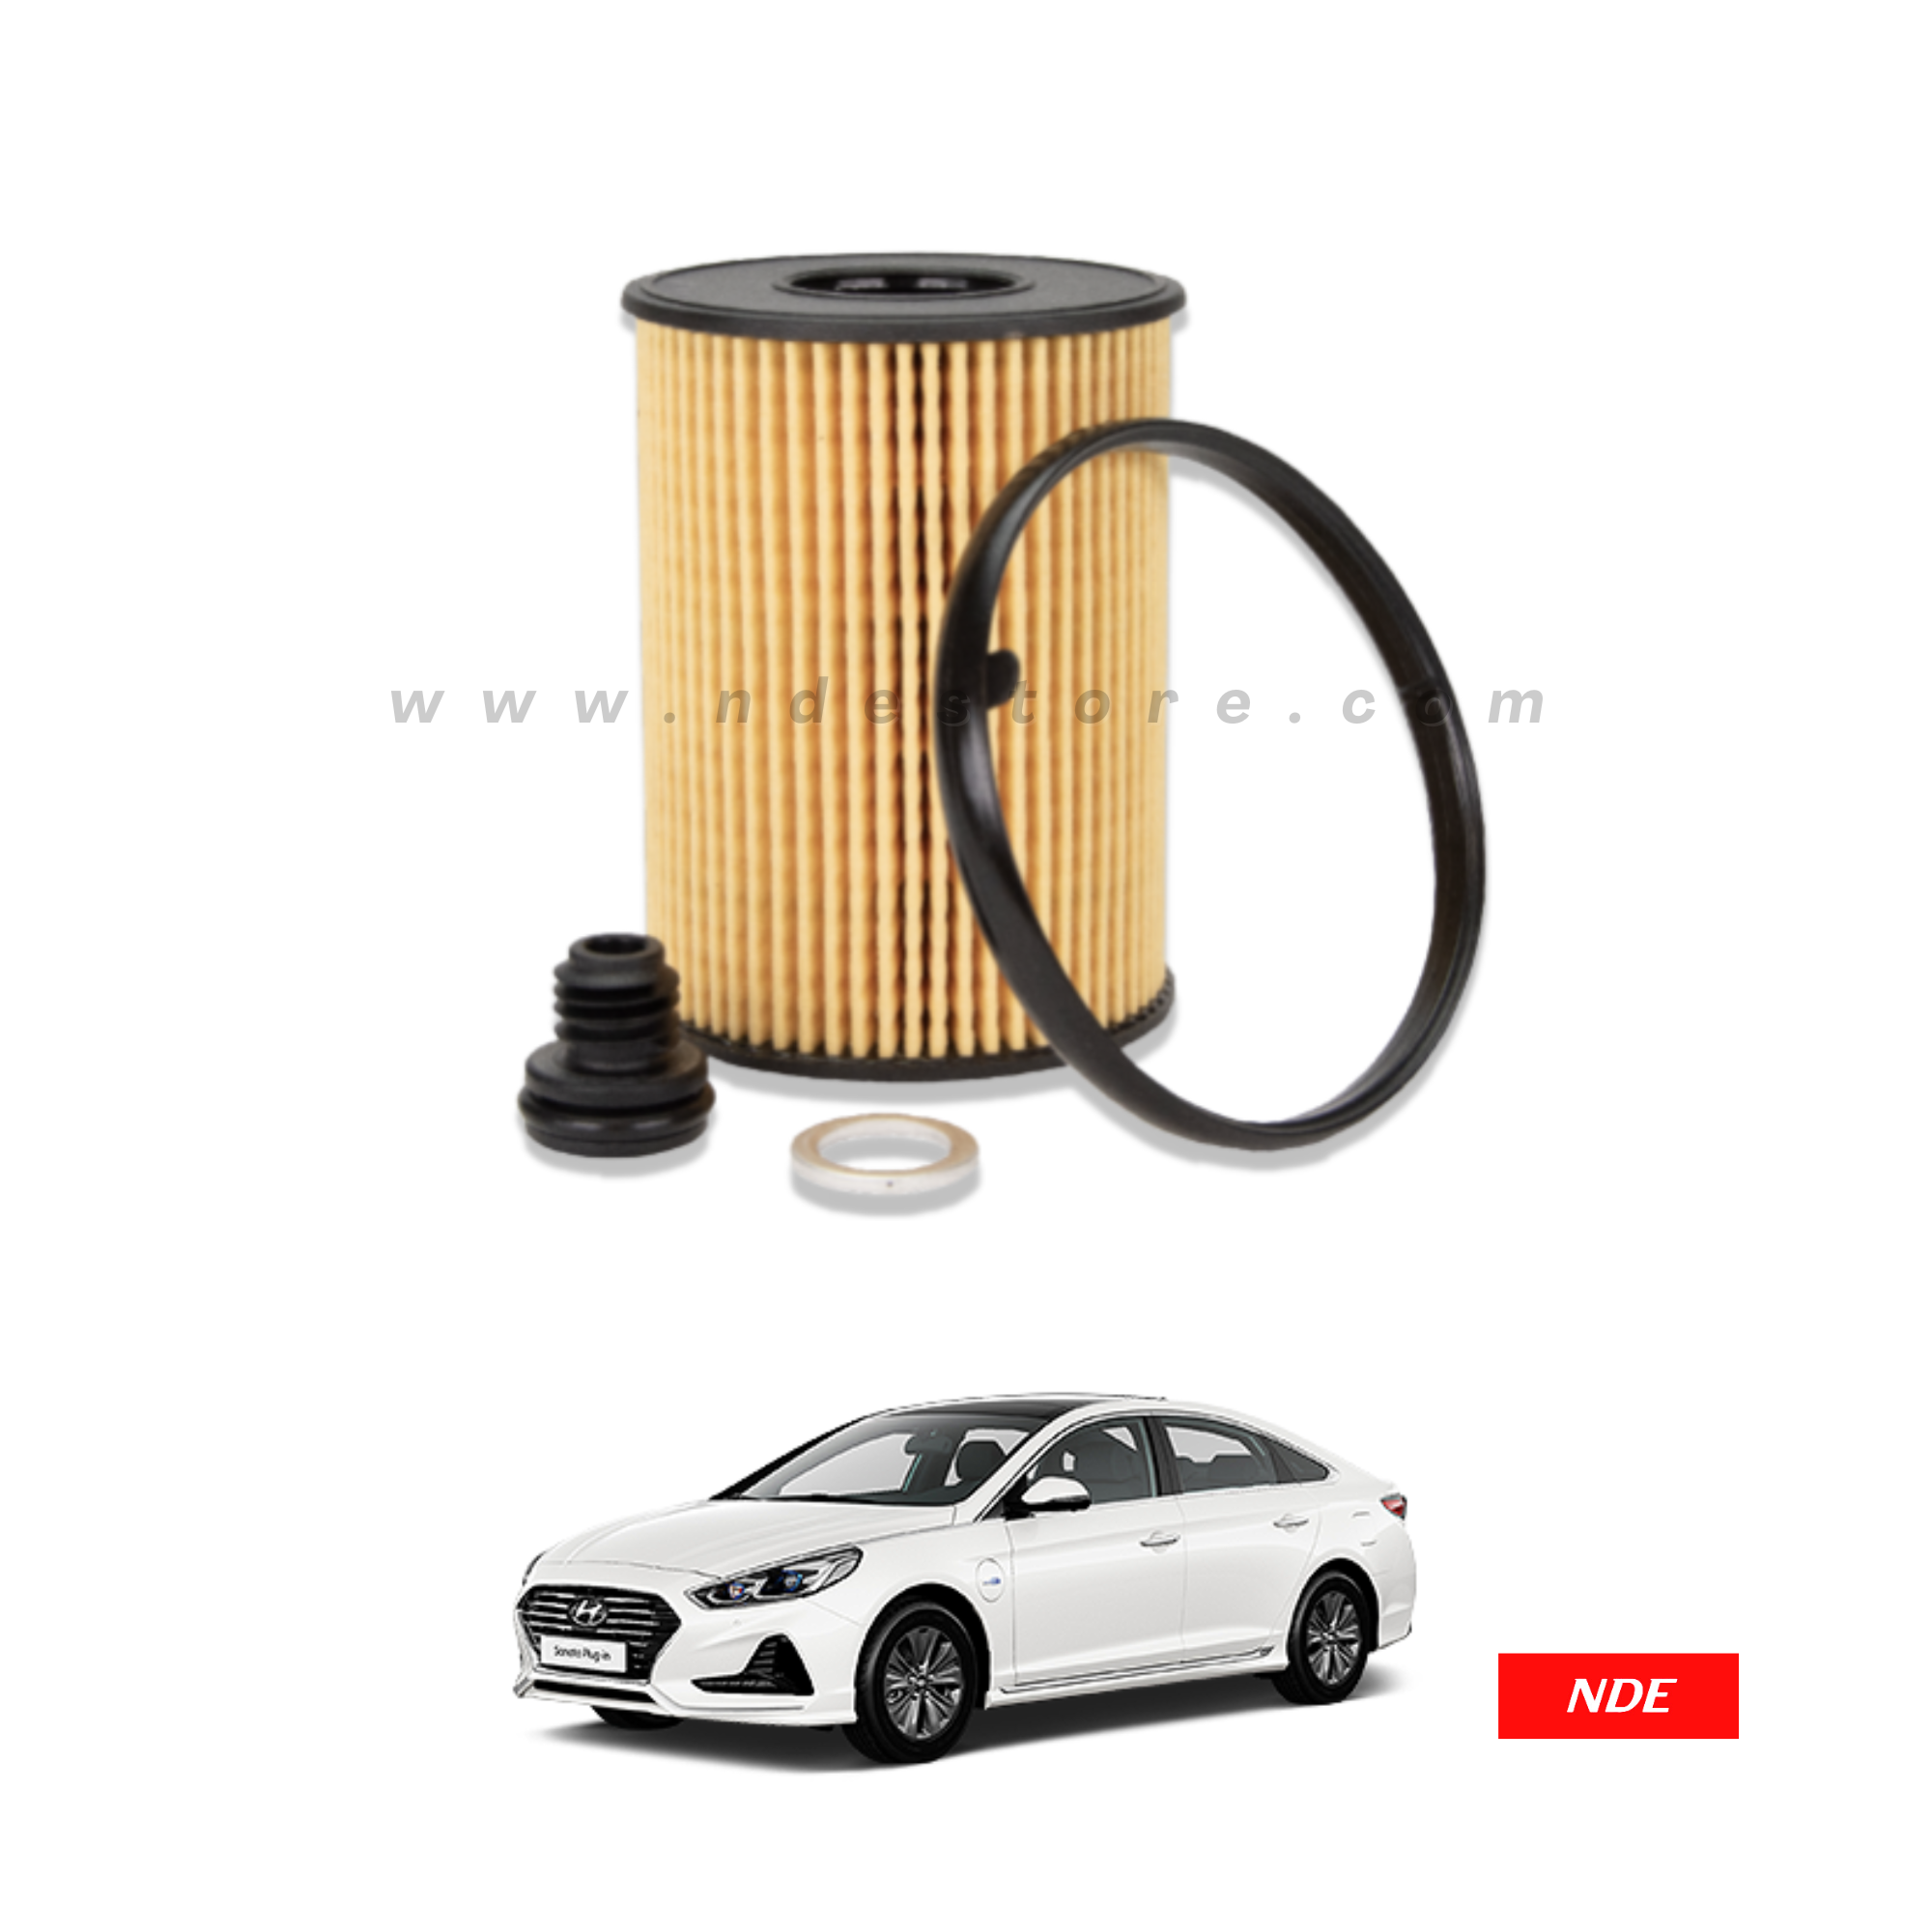 FILTER, OIL FILTER FOR HYUNDAI SONATA (IMPORTED)